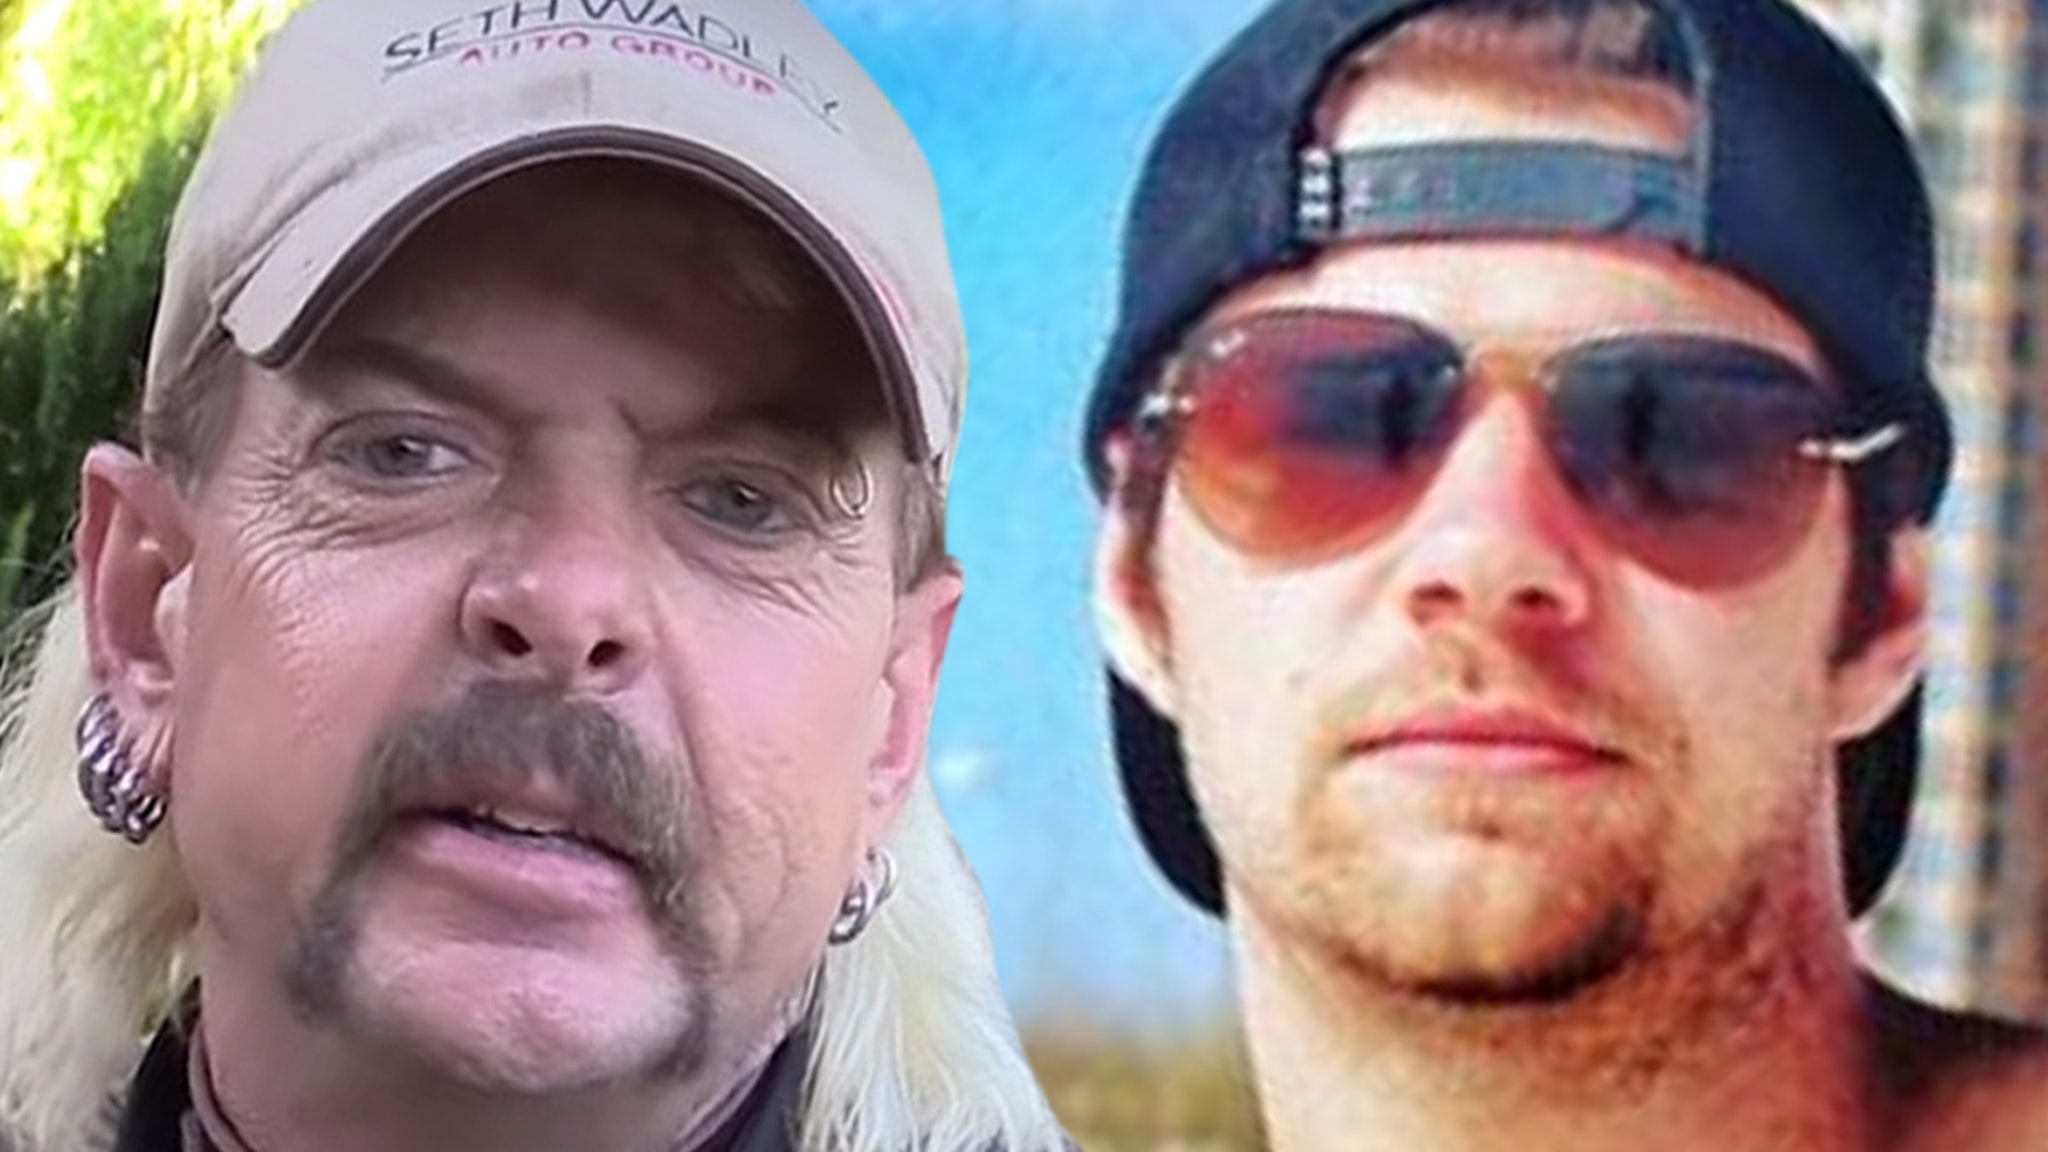 Joe Exotic’s husband, Dillon Passage, says they are getting divorced